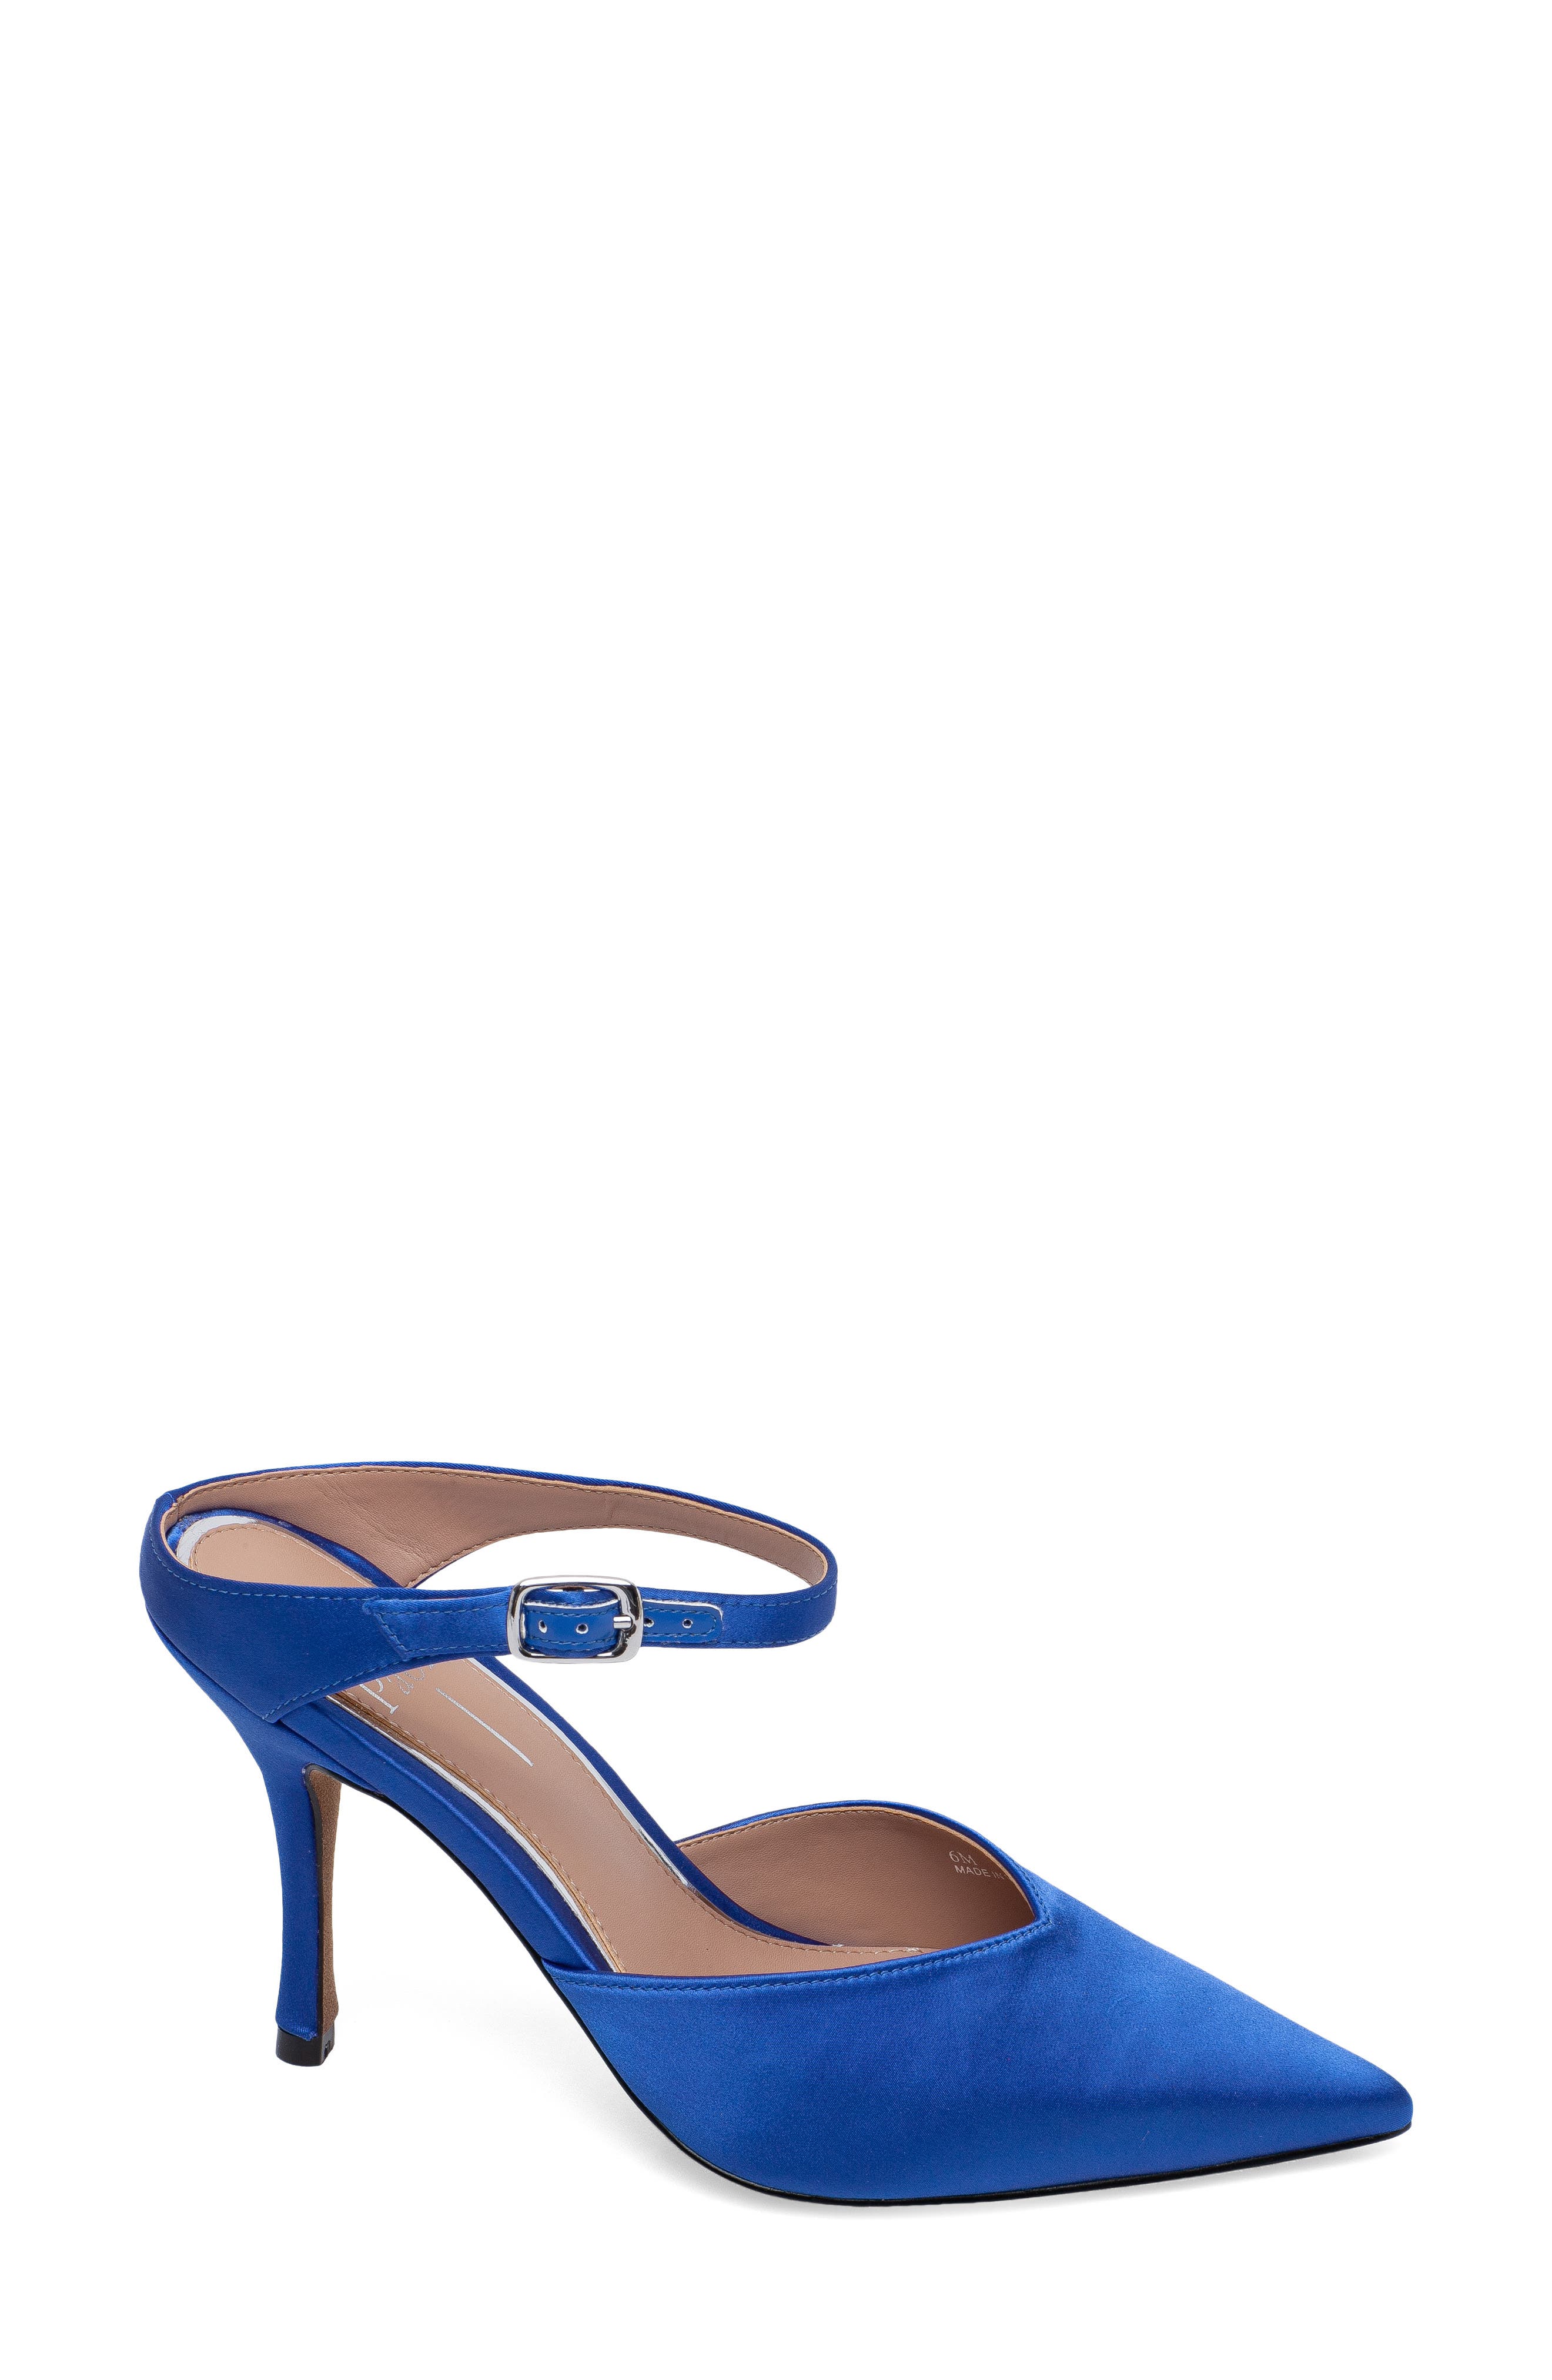 Linea Paolo Yvonne Pointed Toe Mule in Royal Blue